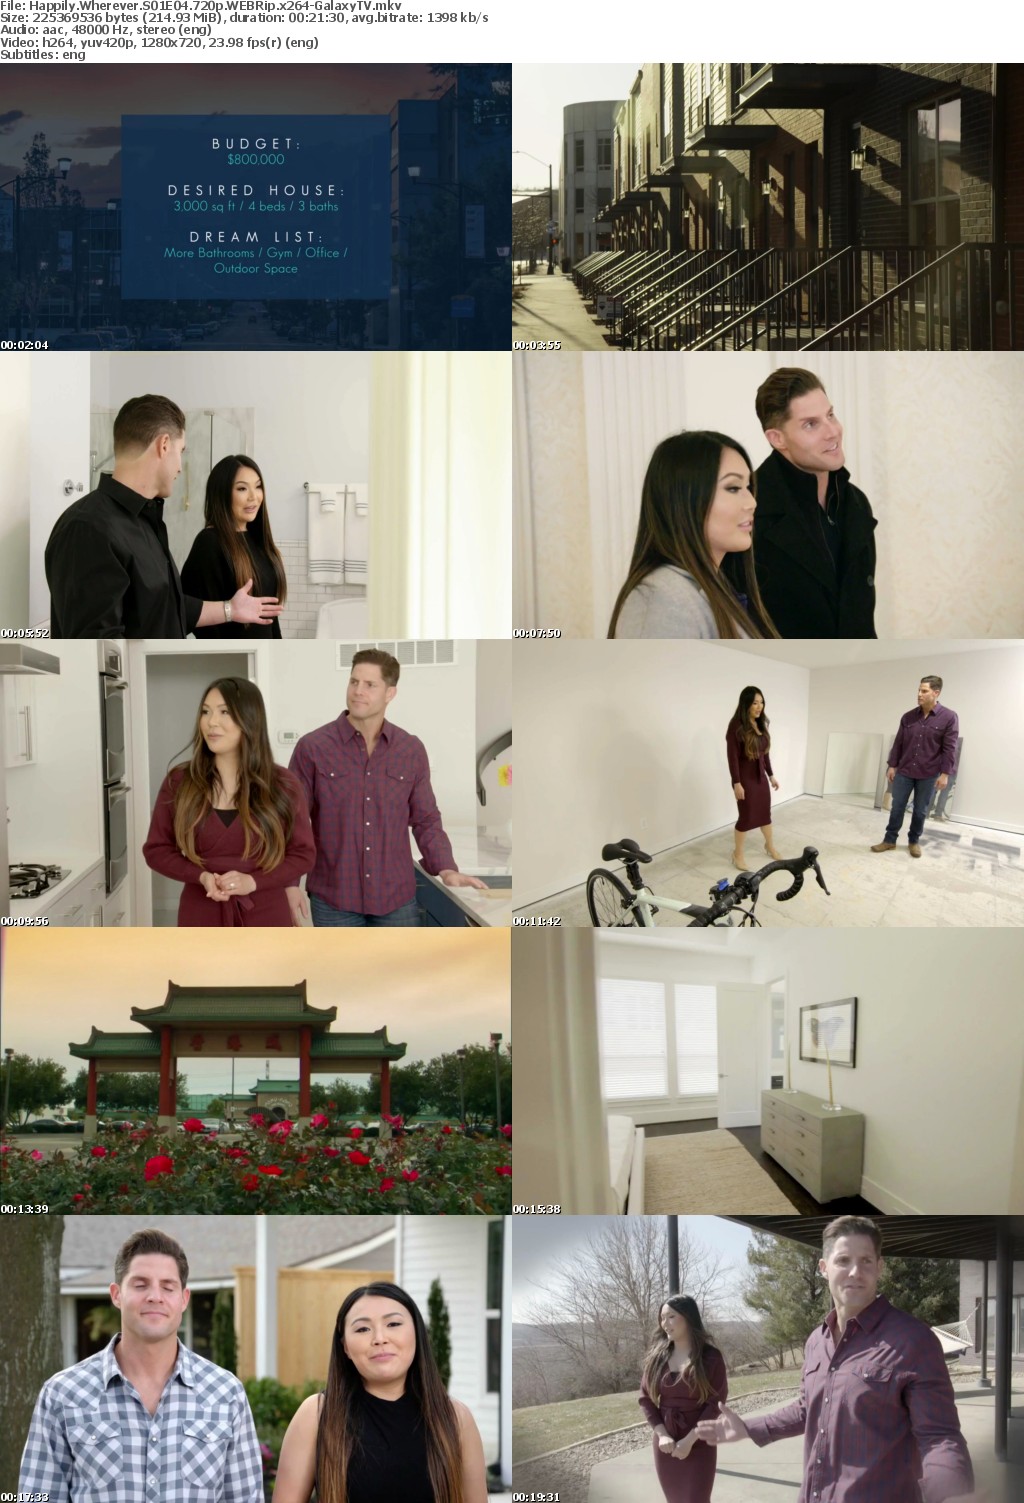 Happily Wherever S01 COMPLETE 720p WEBRip x264-GalaxyTV